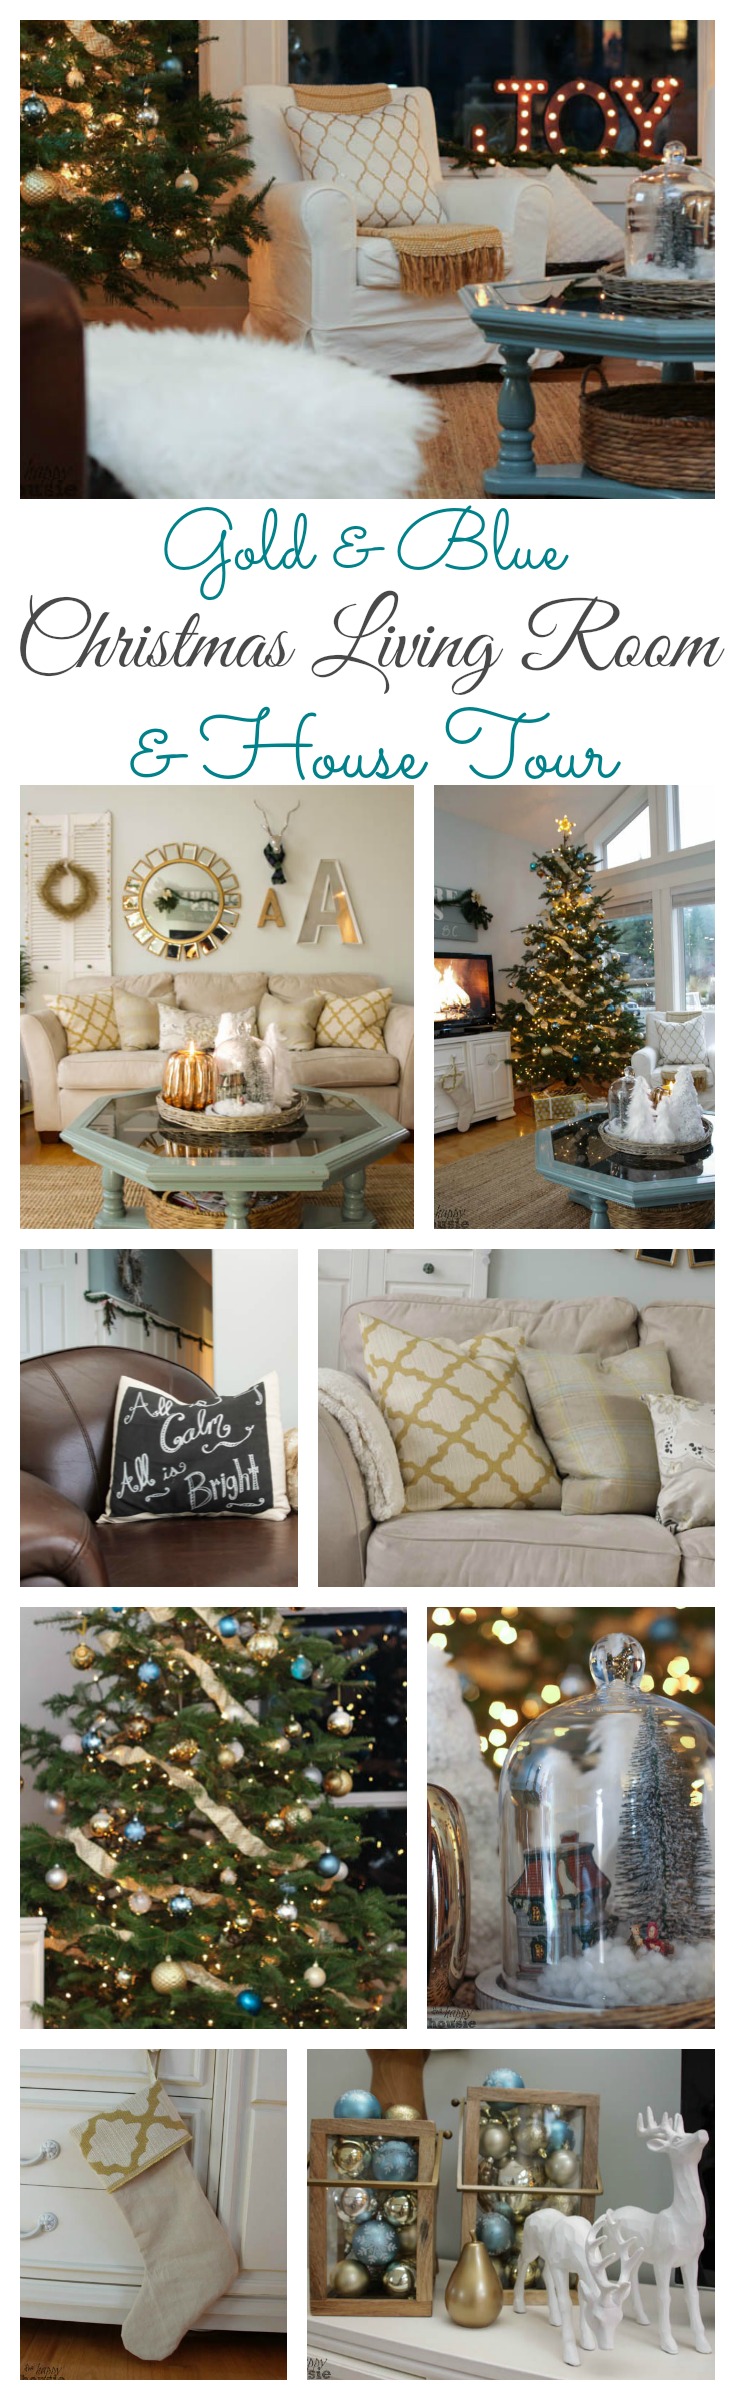 Gold & Blue Christmas Living Room and House Tour at The Happy Housie